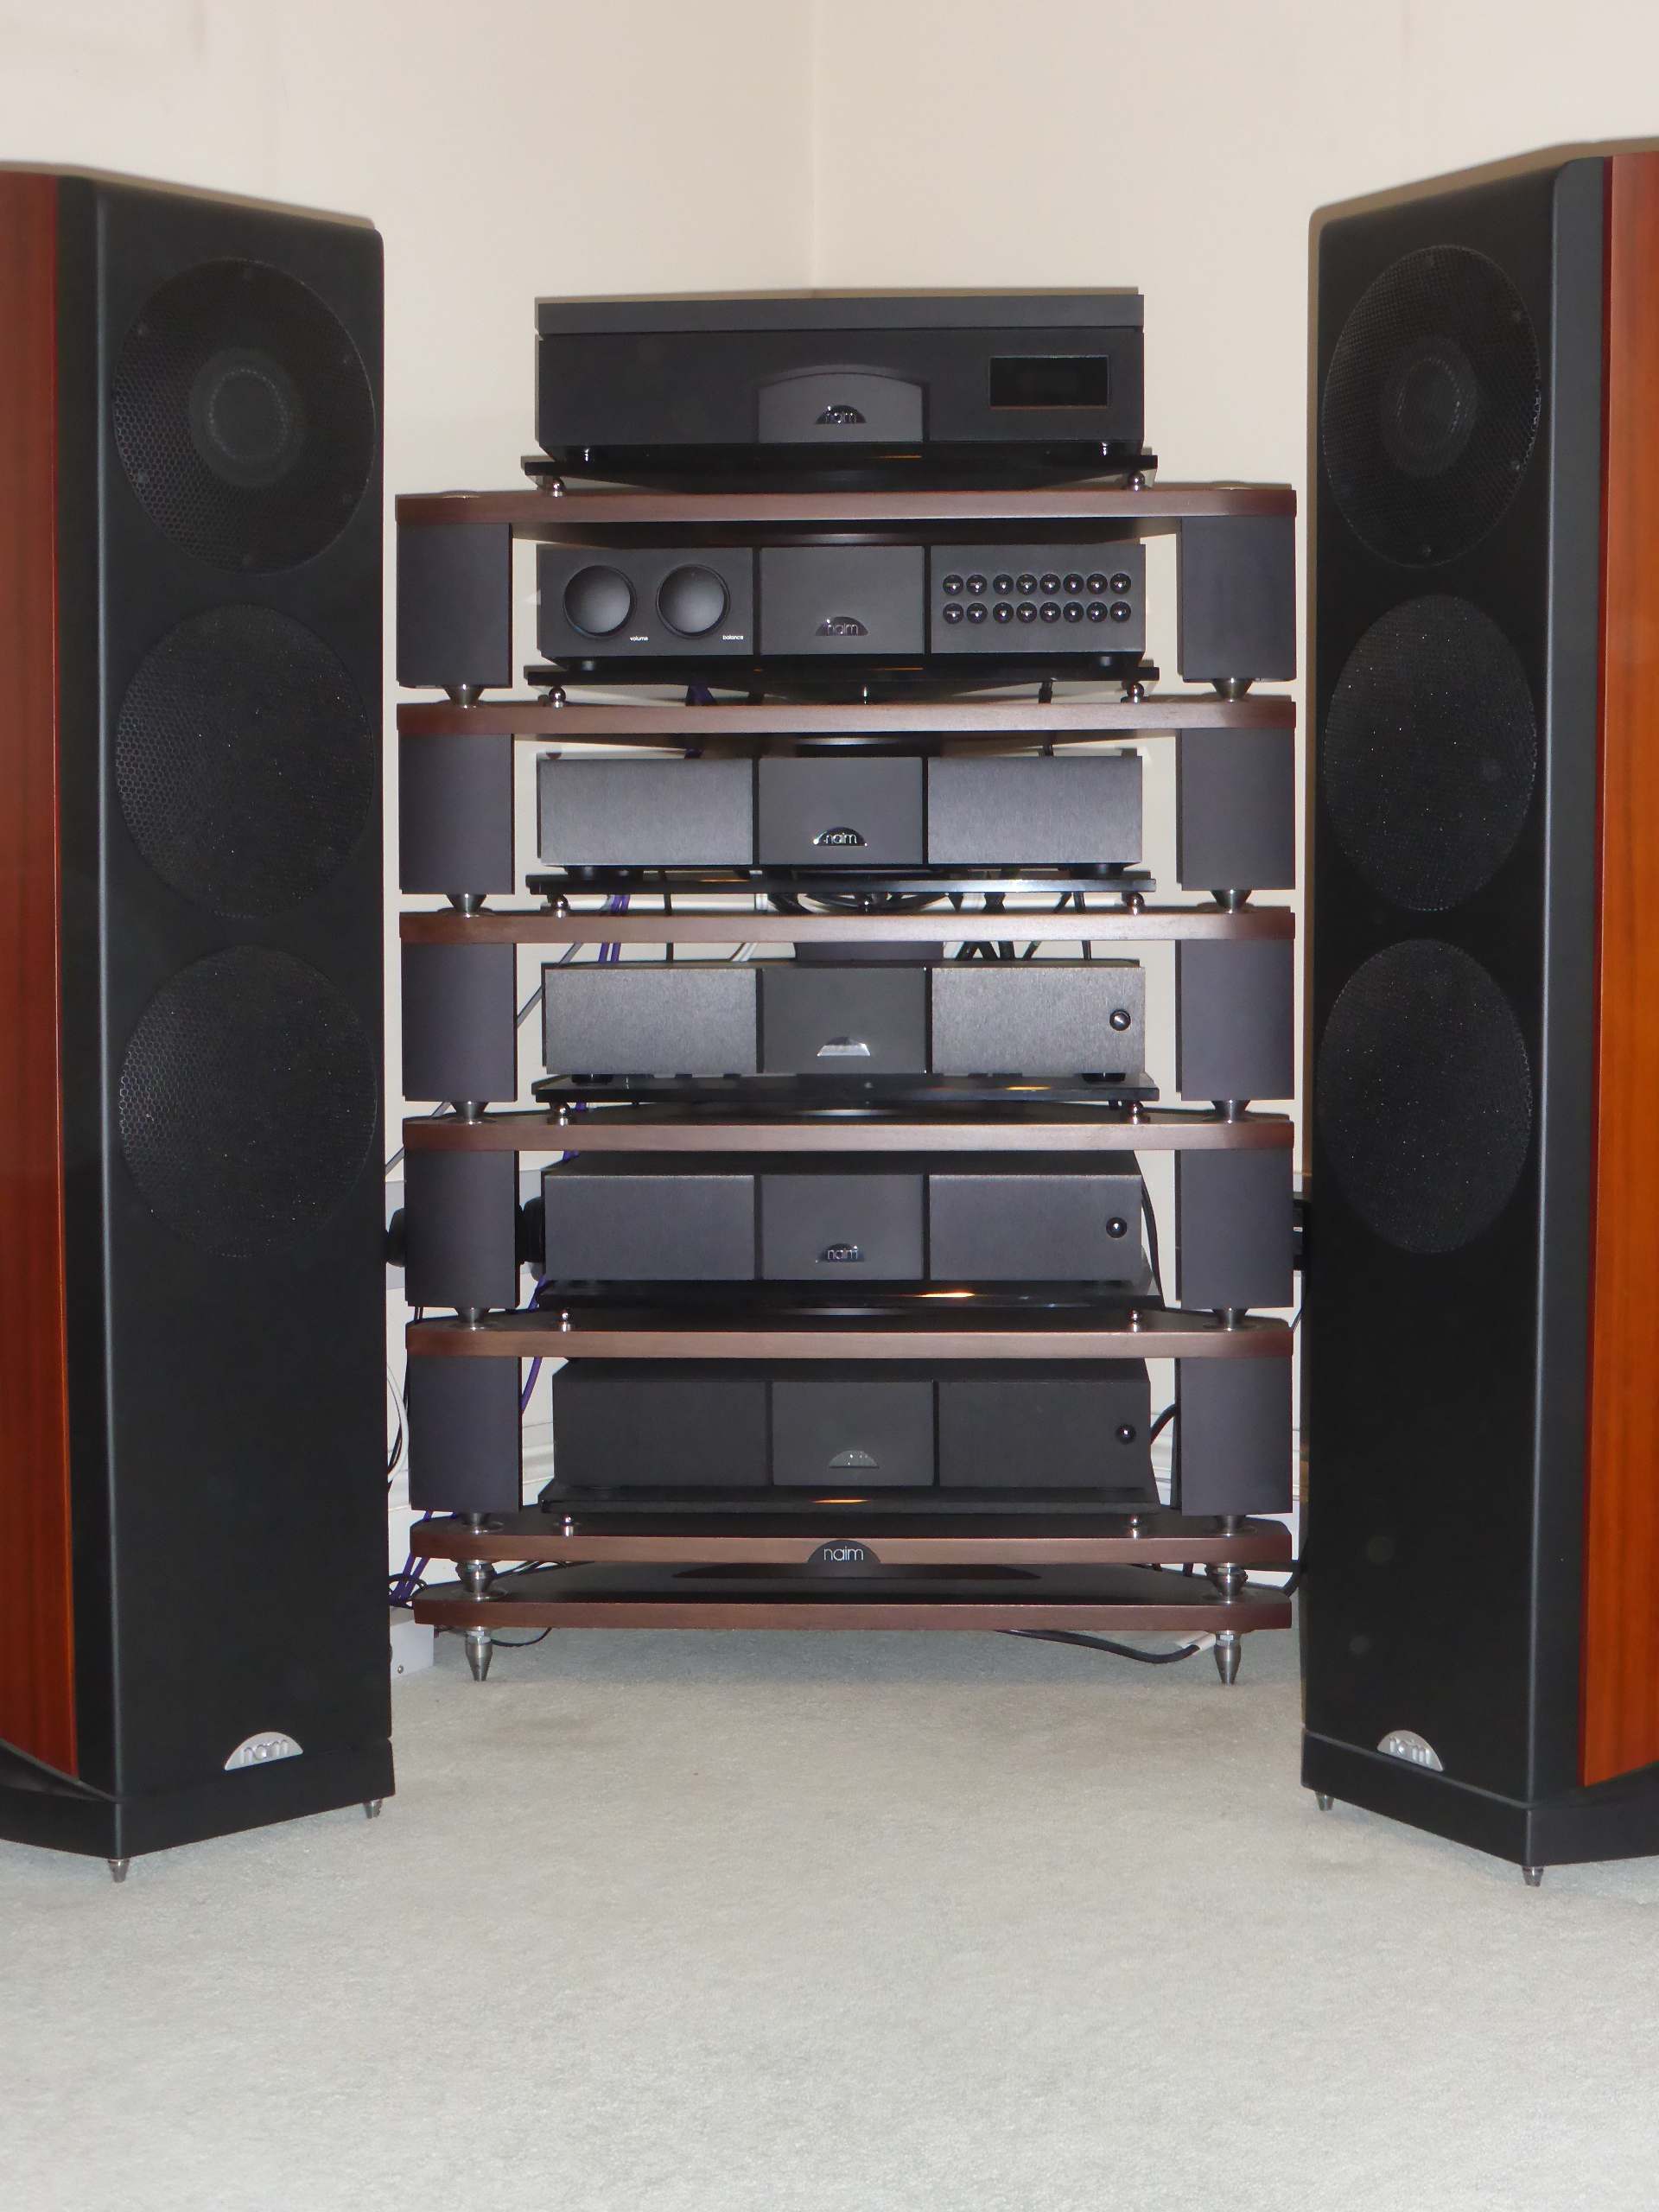 HiFi Sold at Auction